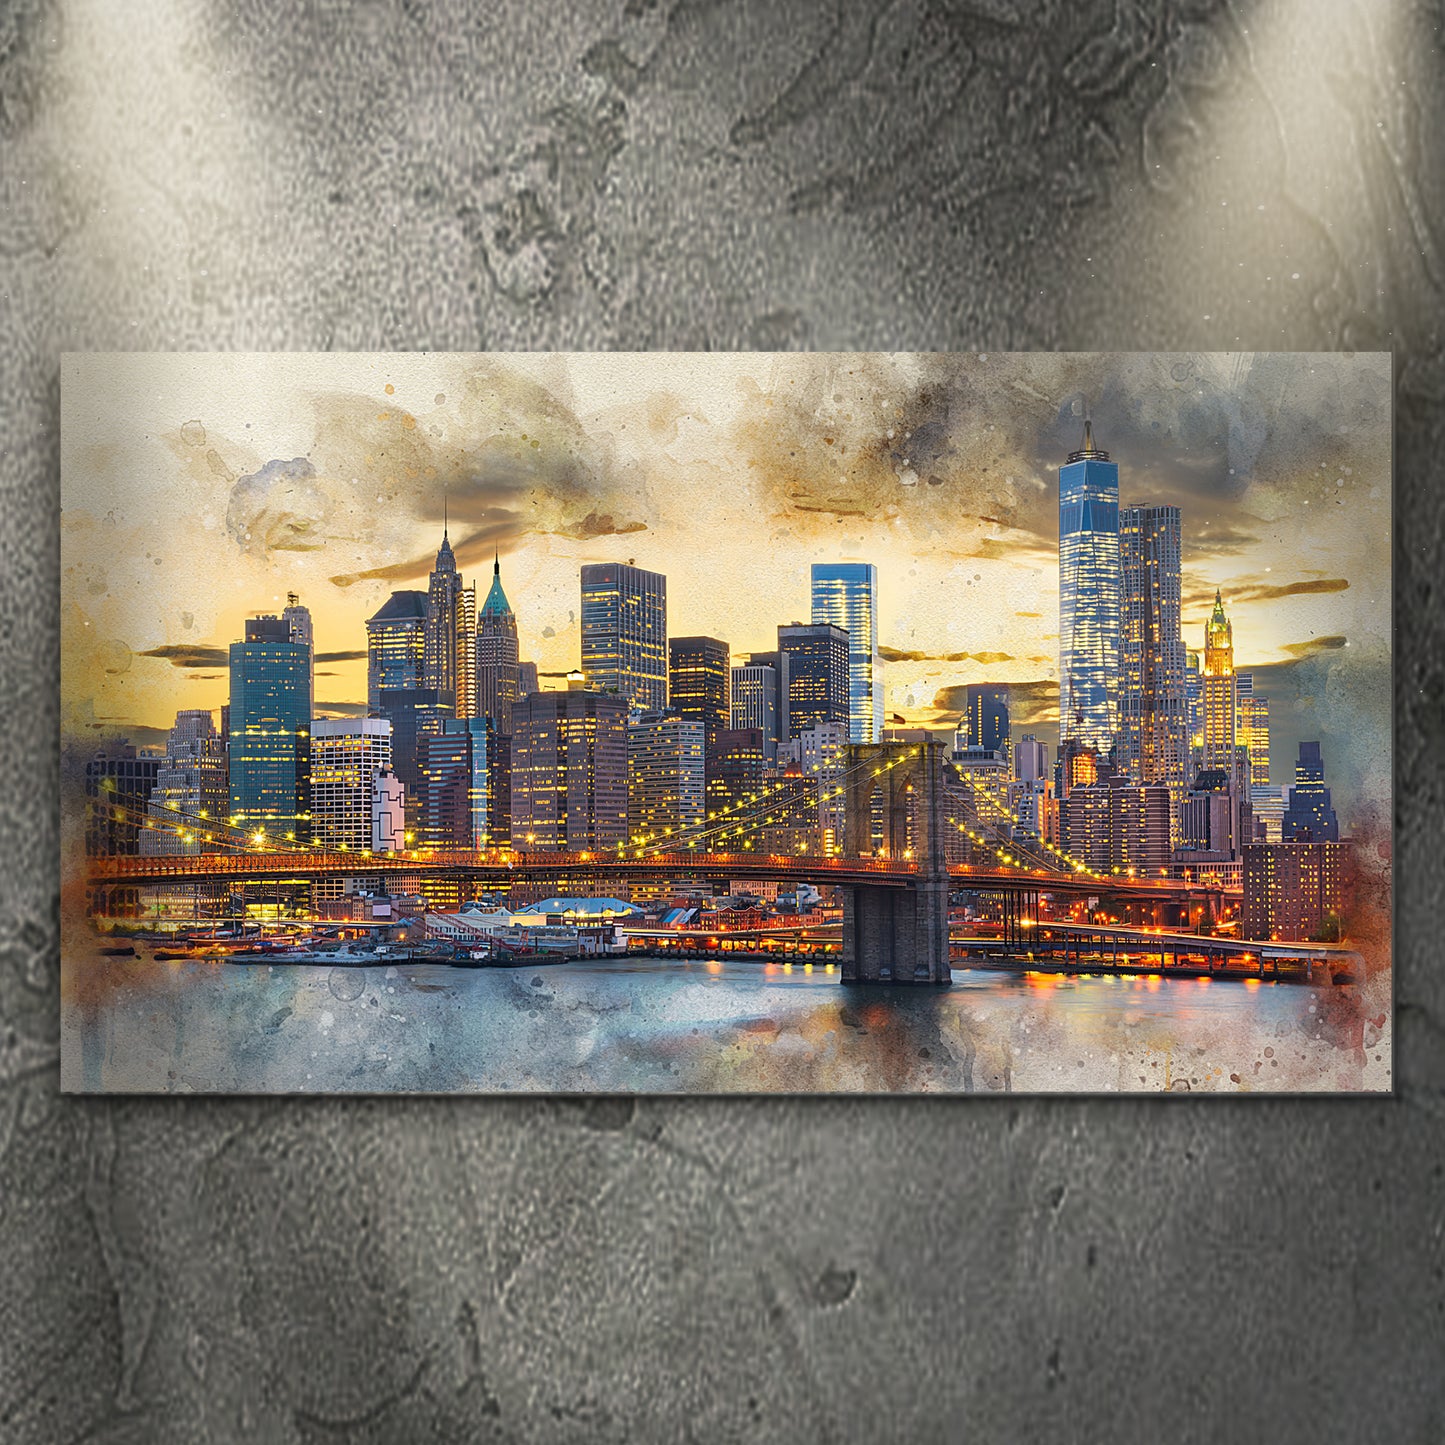 New York City Night View Canvas Wall Art - Image by Tailored Canvases